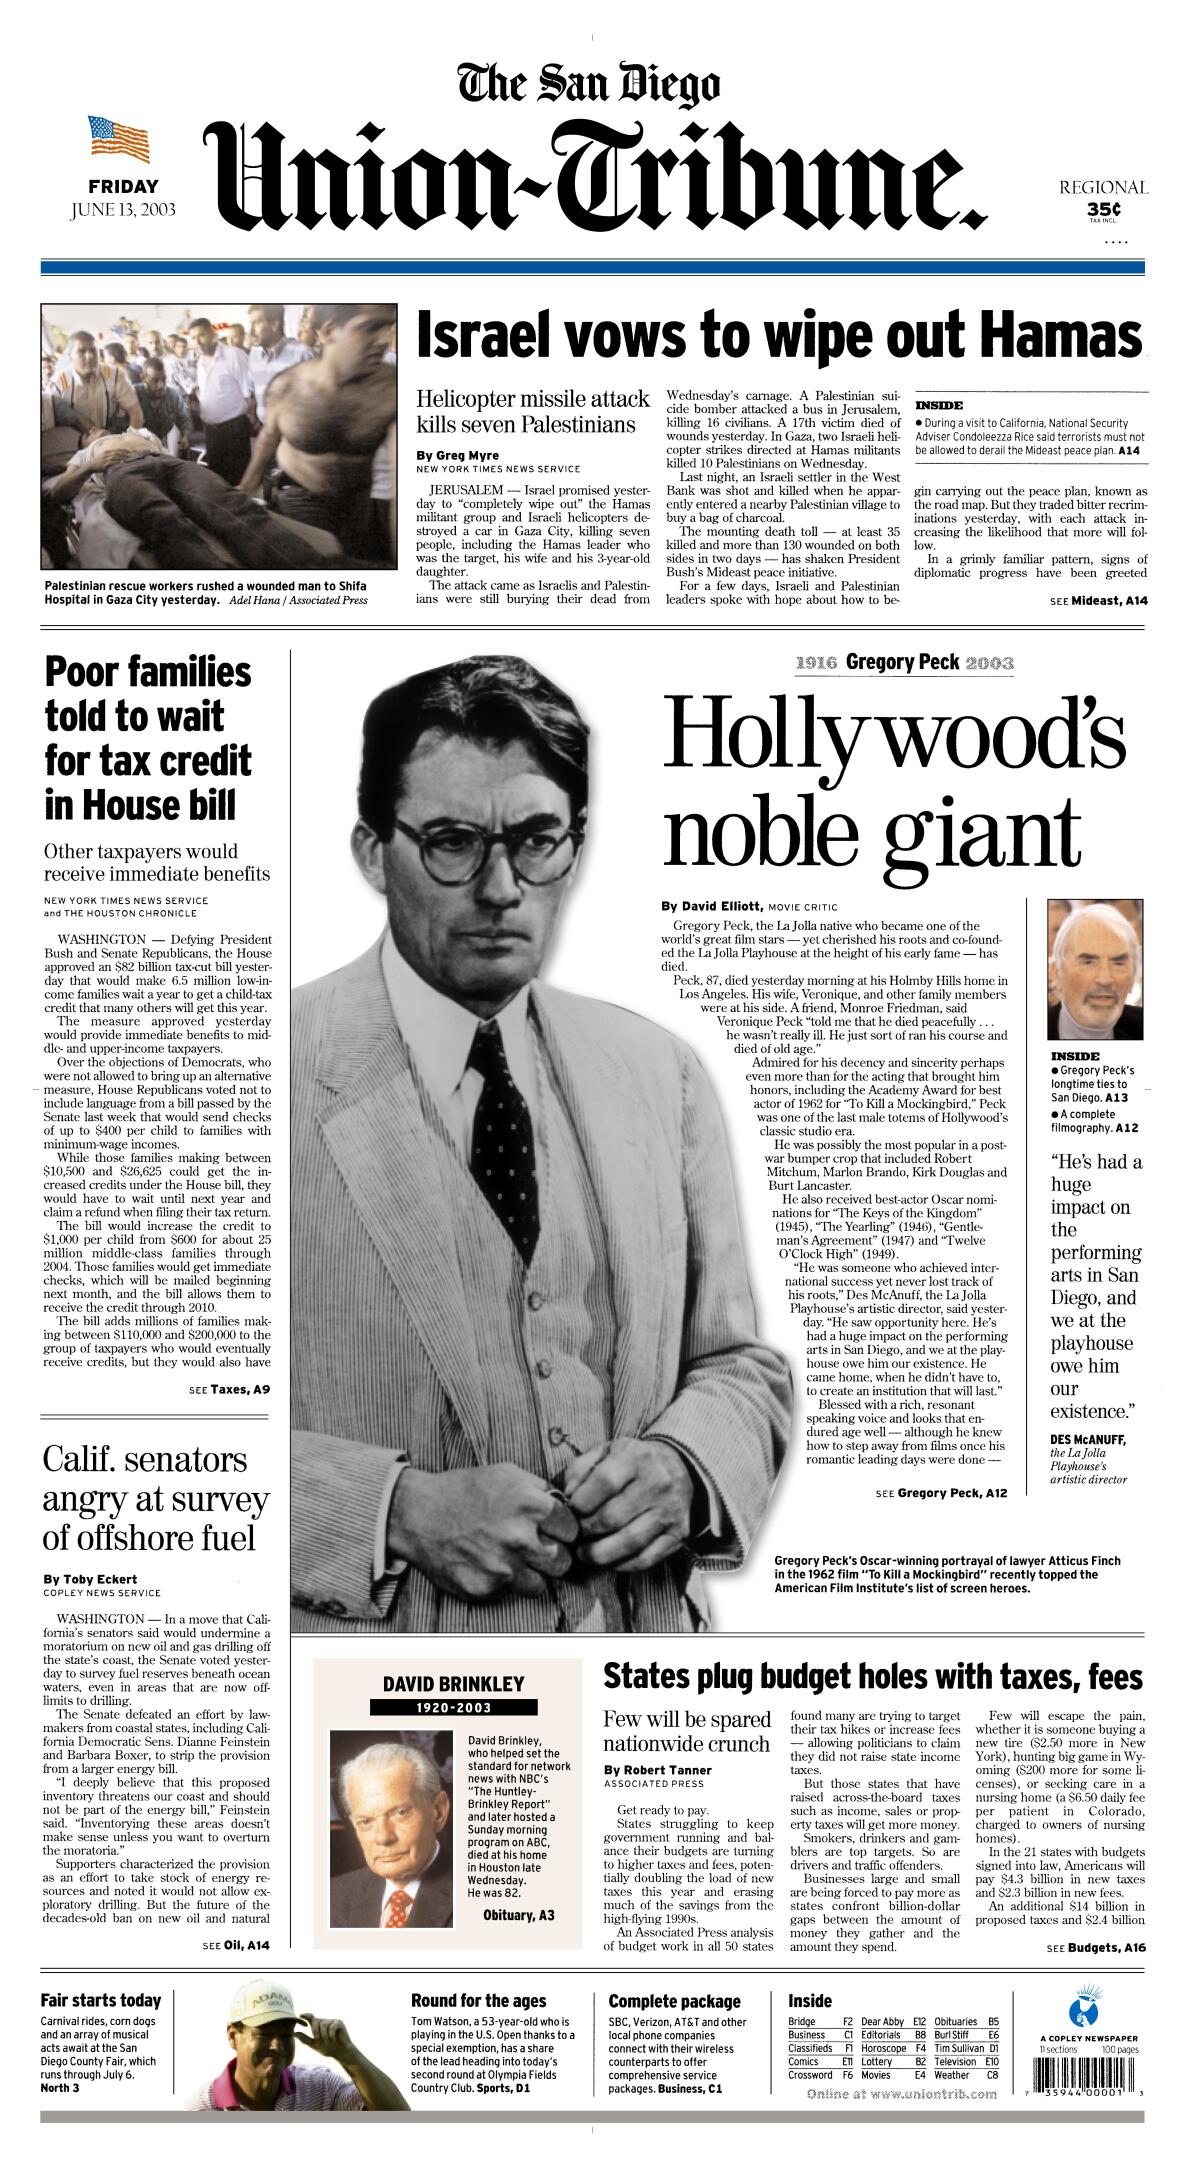 A-1 front page of The San Diego Union-Tribune published June 13, 2003 